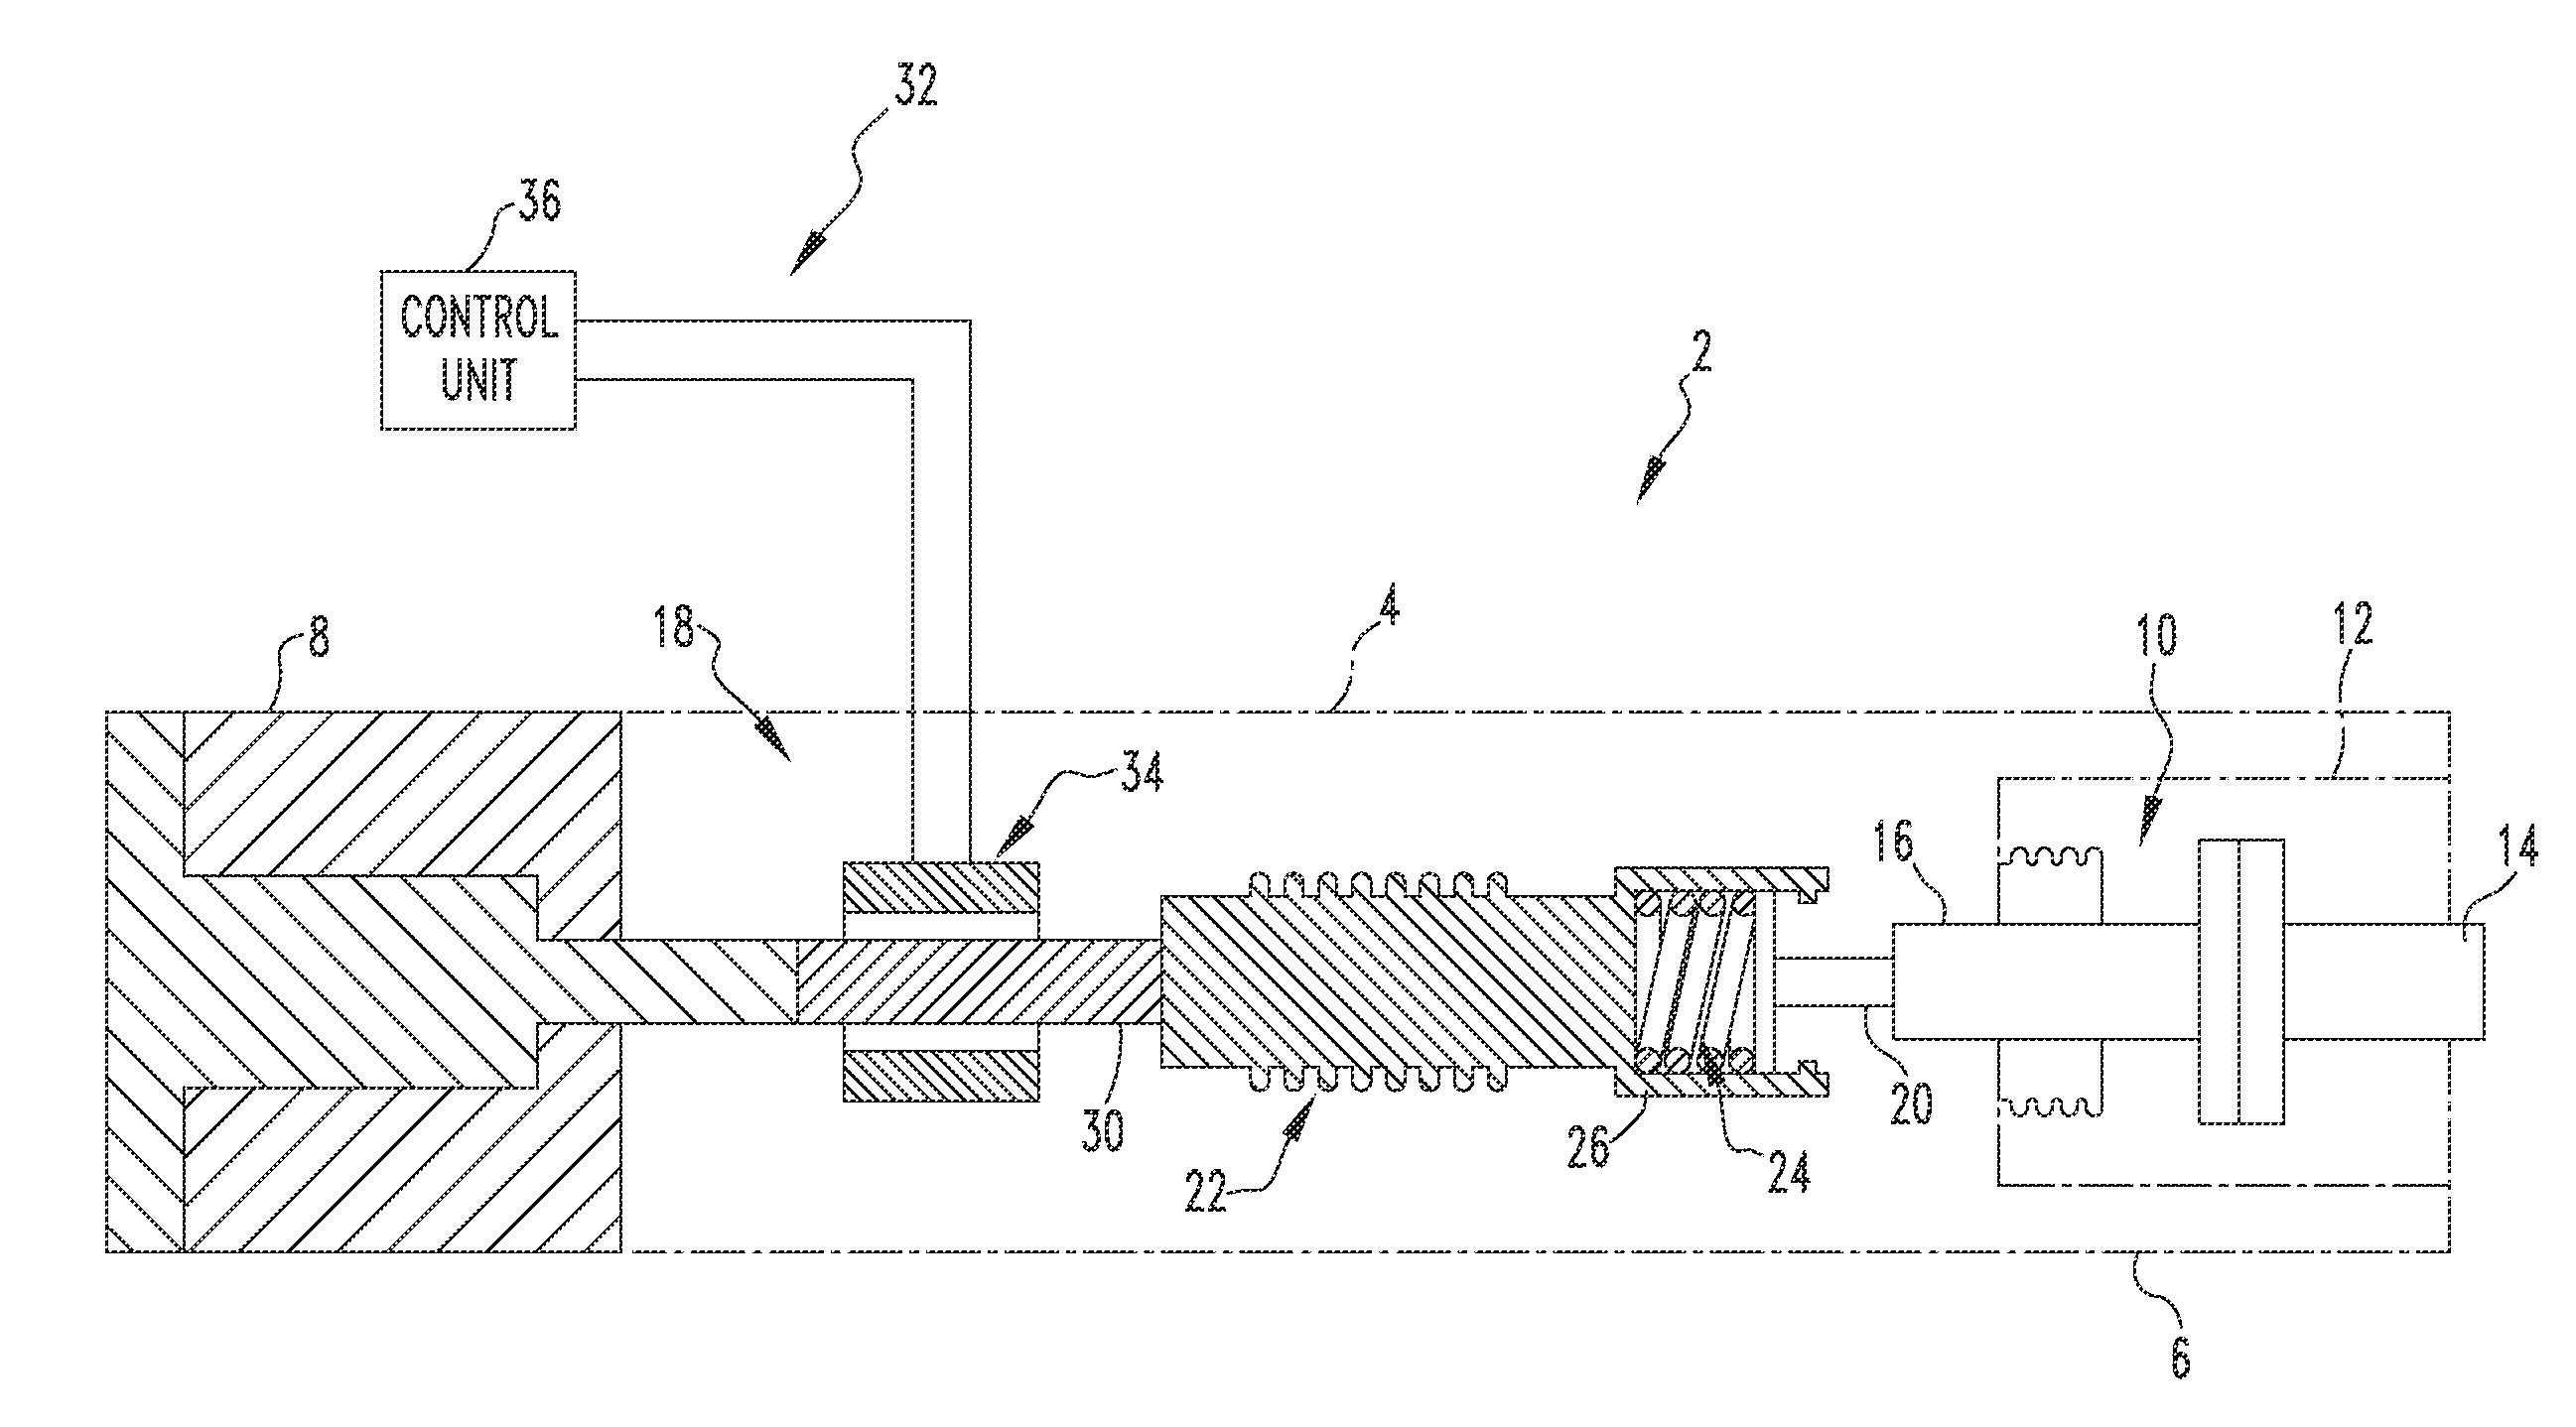 Circuit interrupter employing a linear transducer to monitor contact erosion